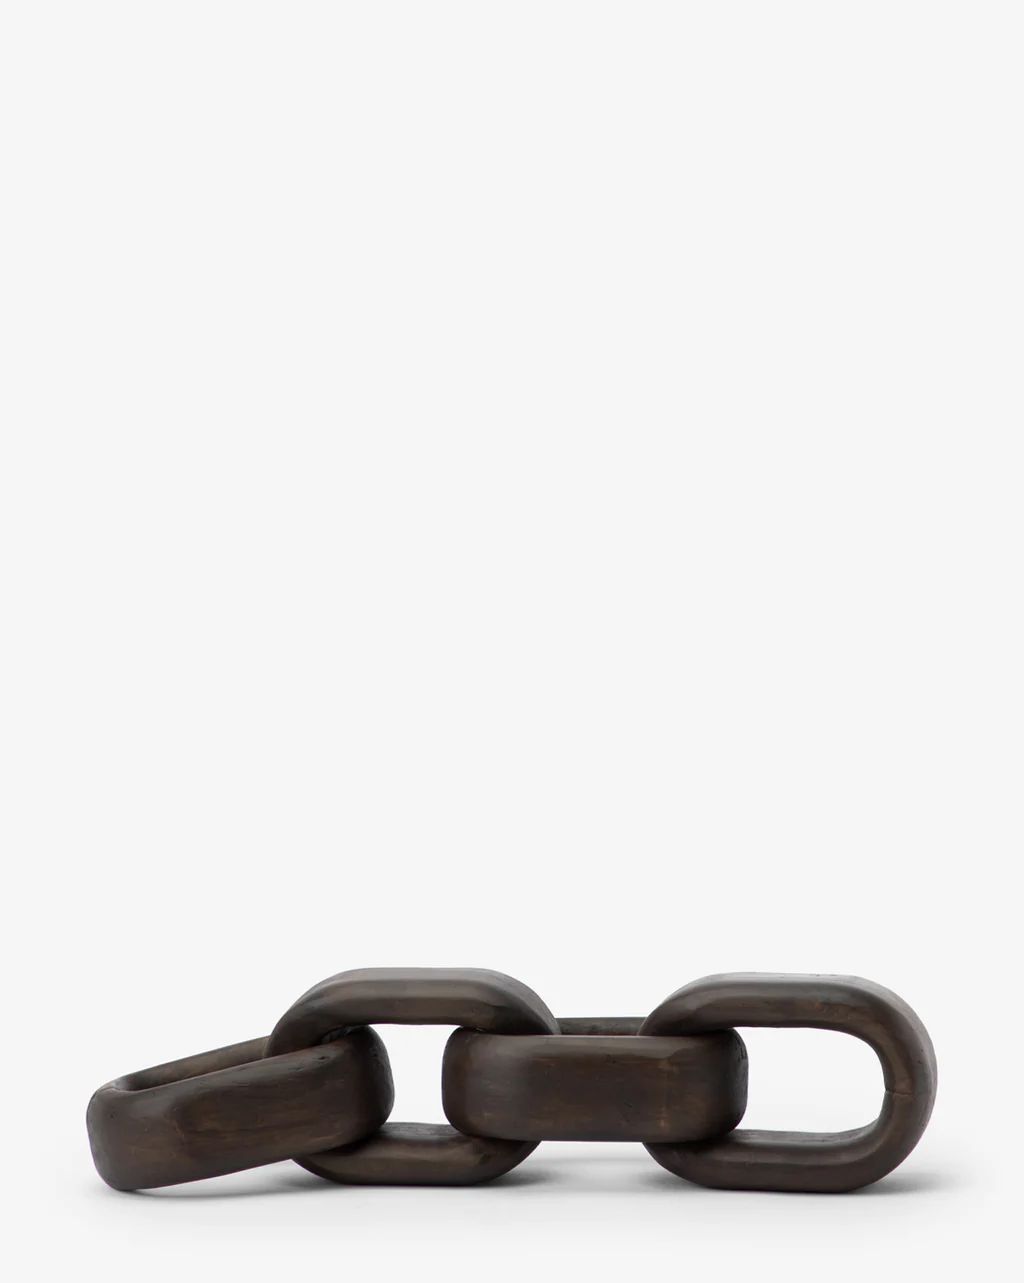 Reclaimed Wooden Chain | McGee & Co.